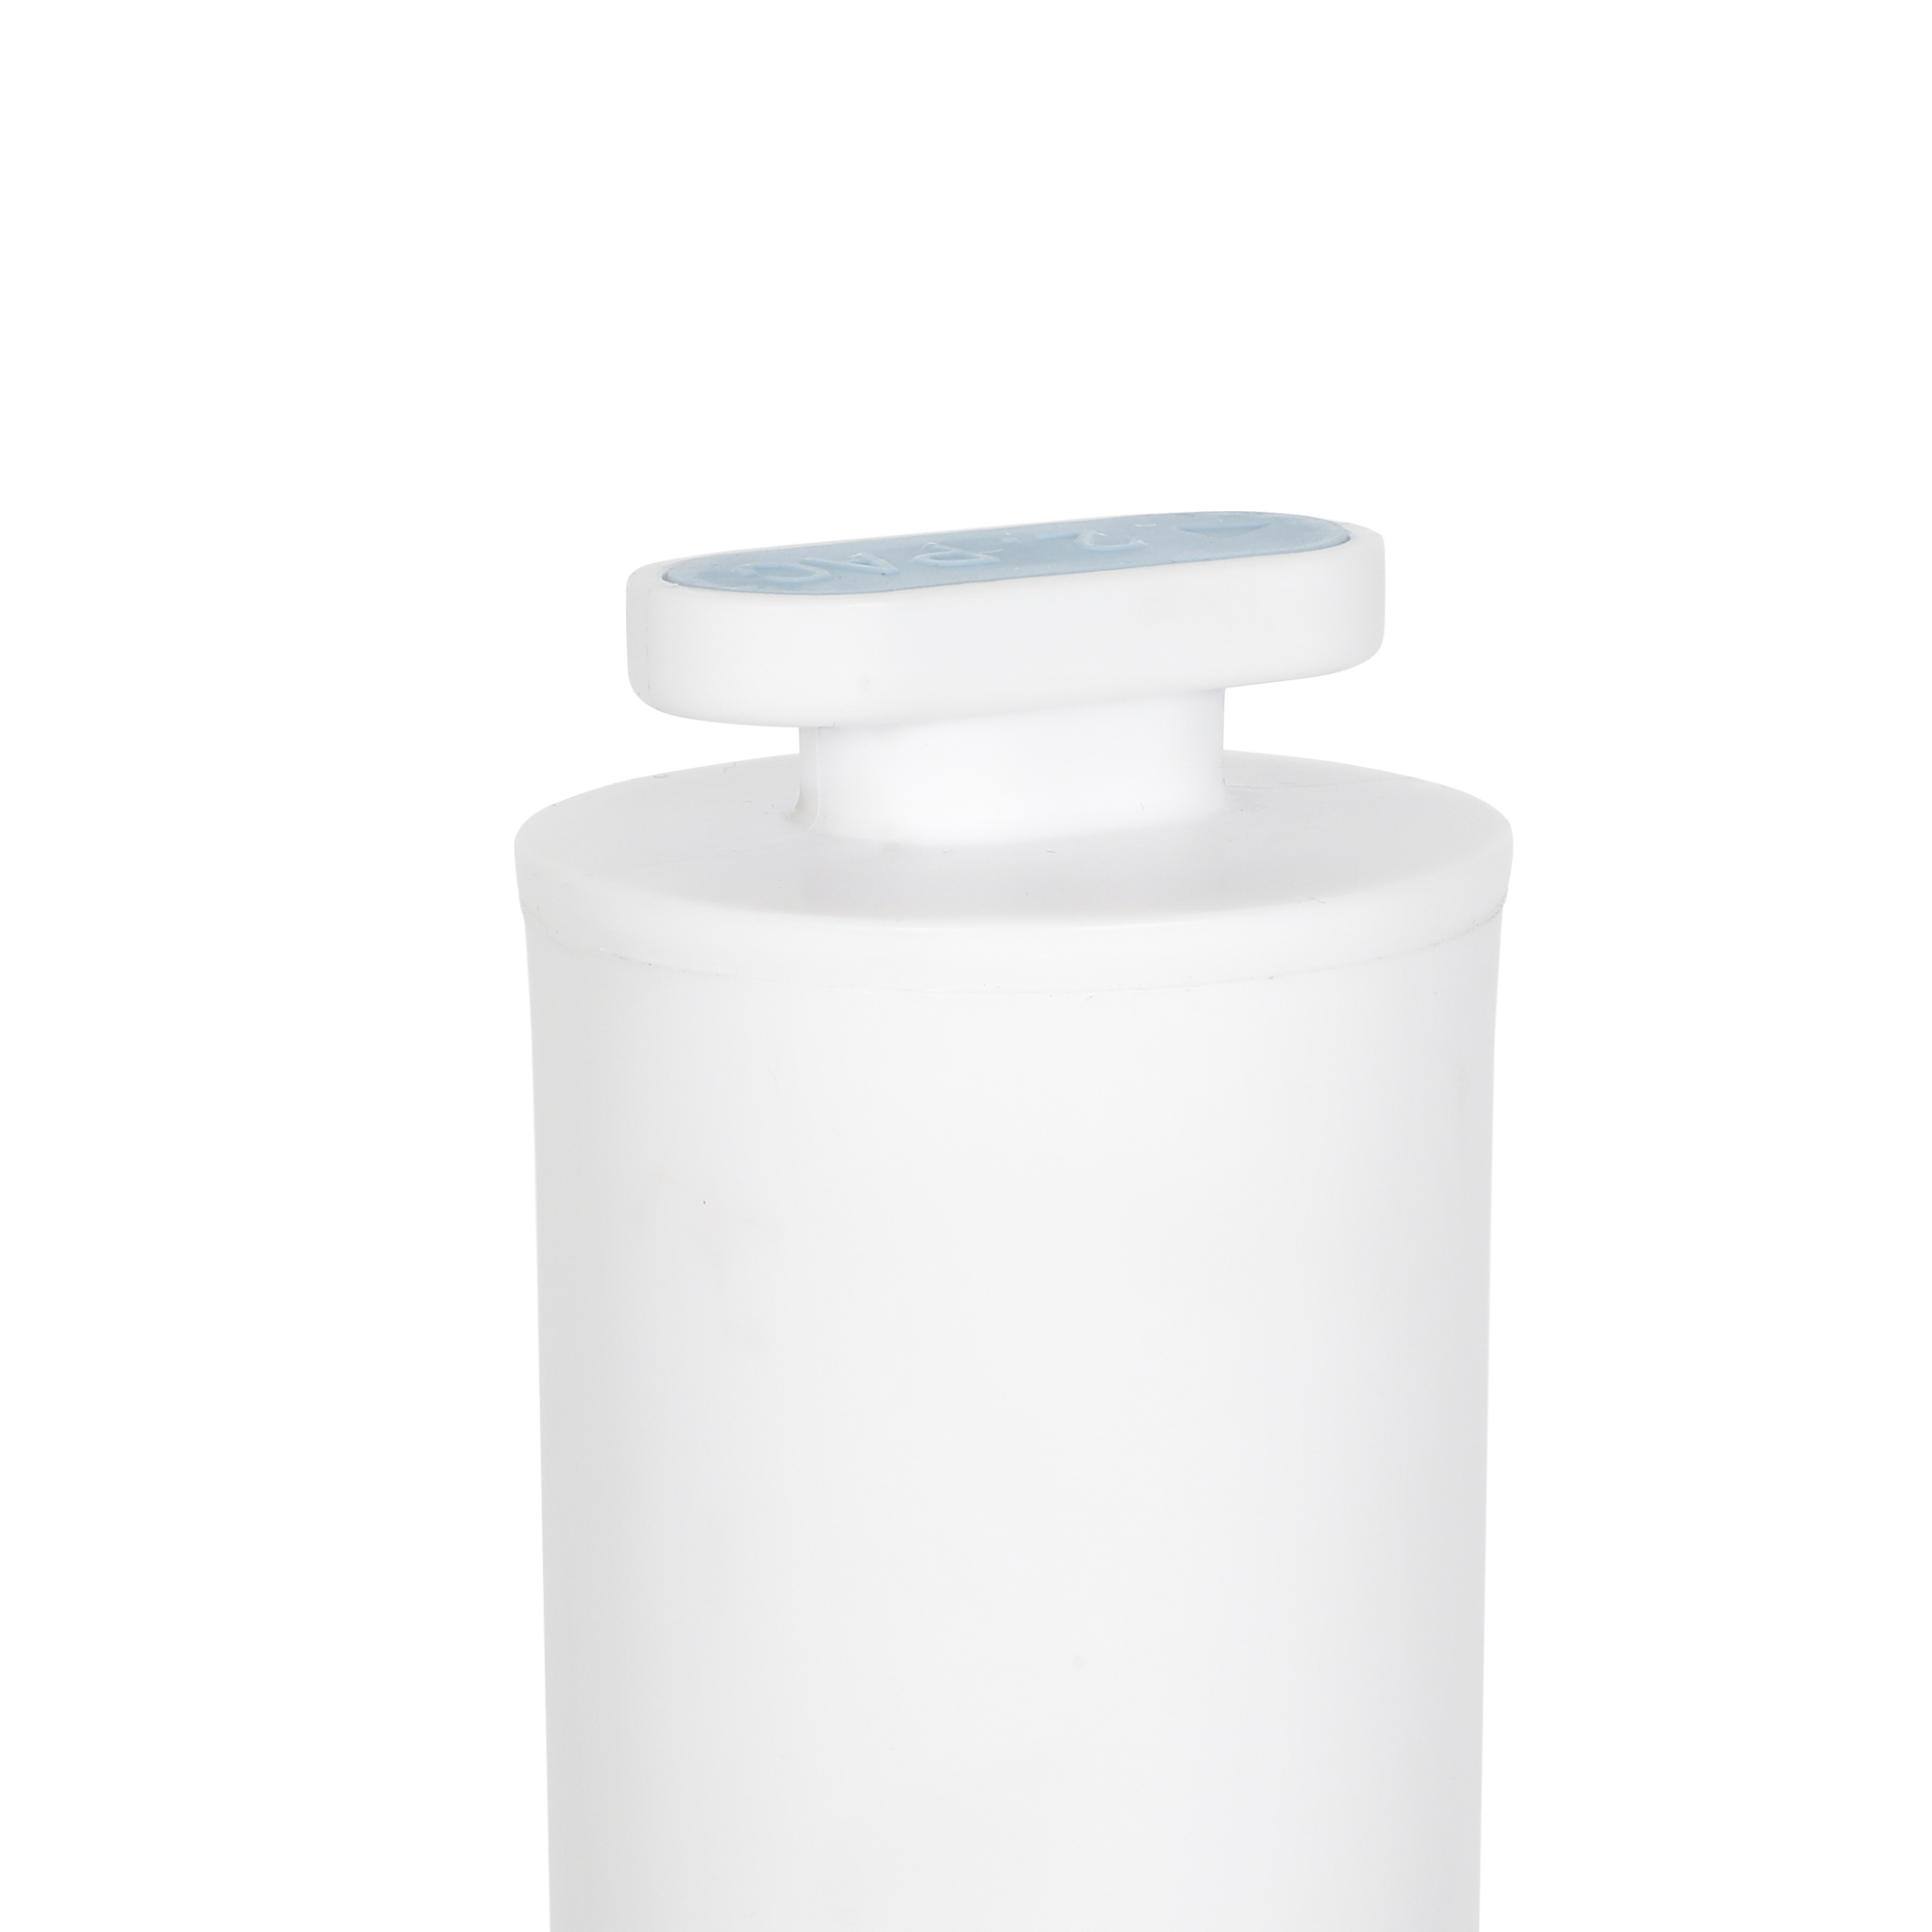 Reasonable price Nf Filter Cartridge - Filter Cartridge easy replace suit for various water purifier – Filterpur detail pictures